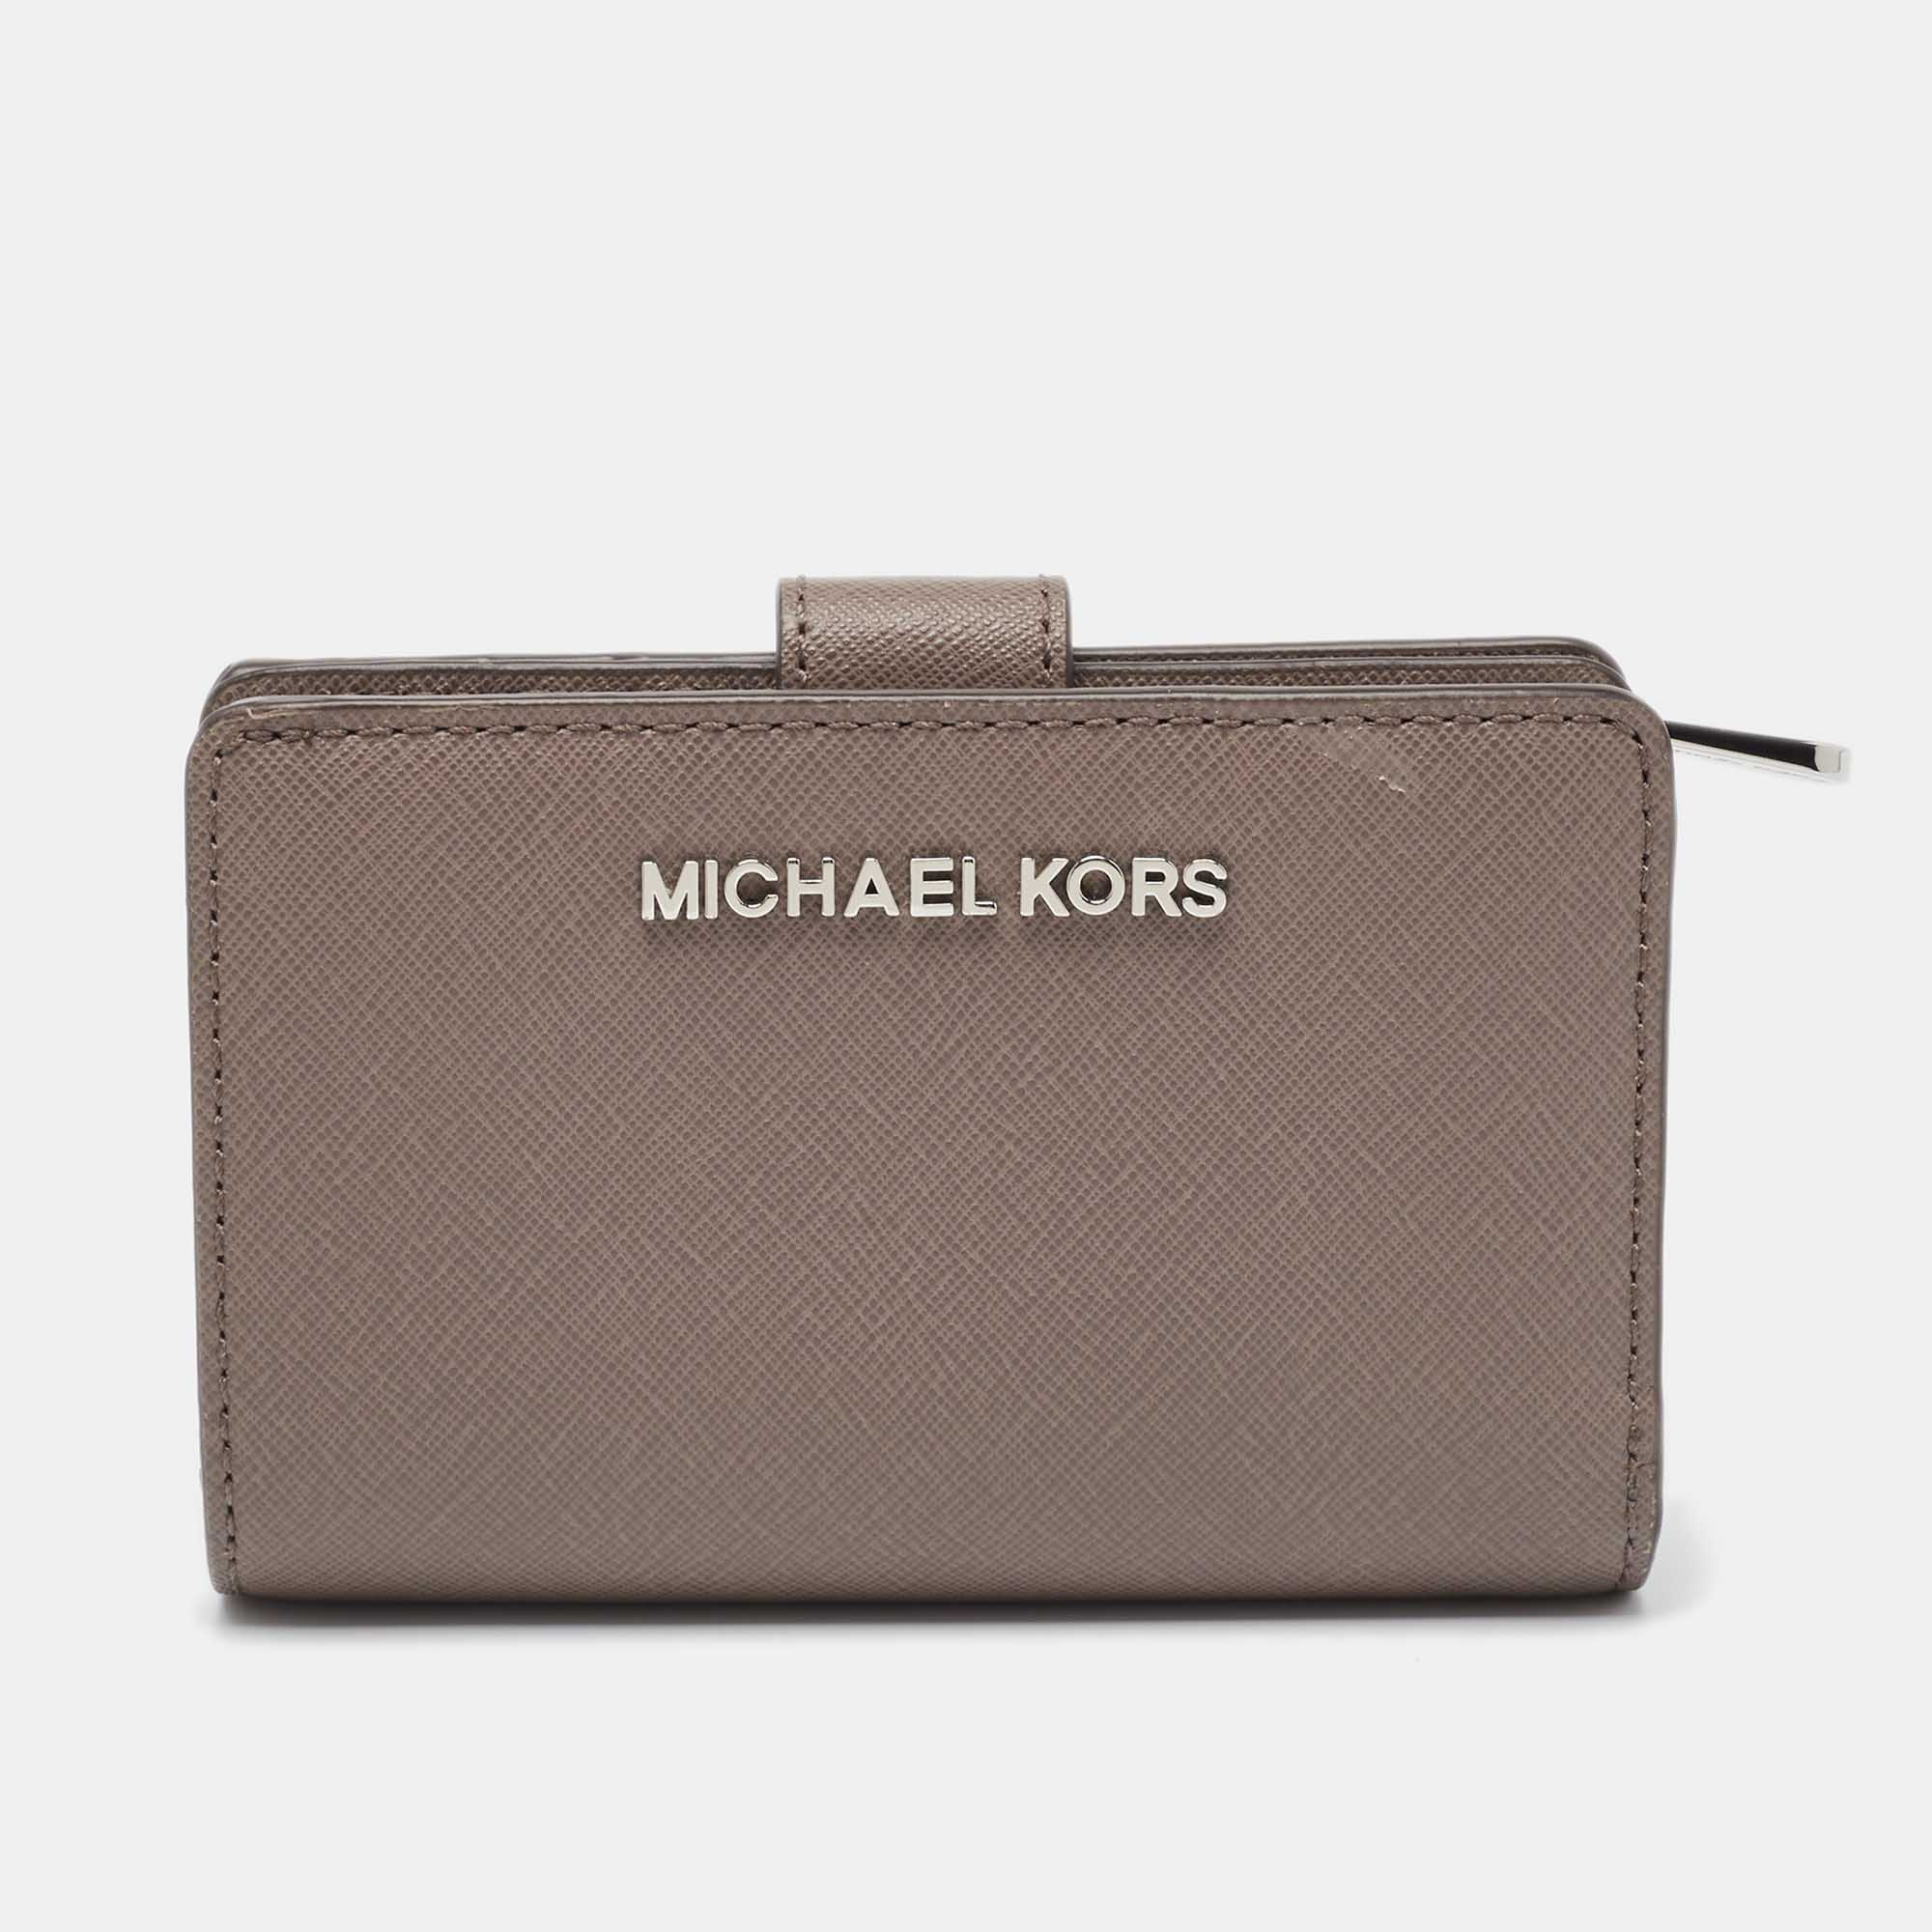 Pre-owned Michael Kors Grey Saffiano Leather French Compact Wallet